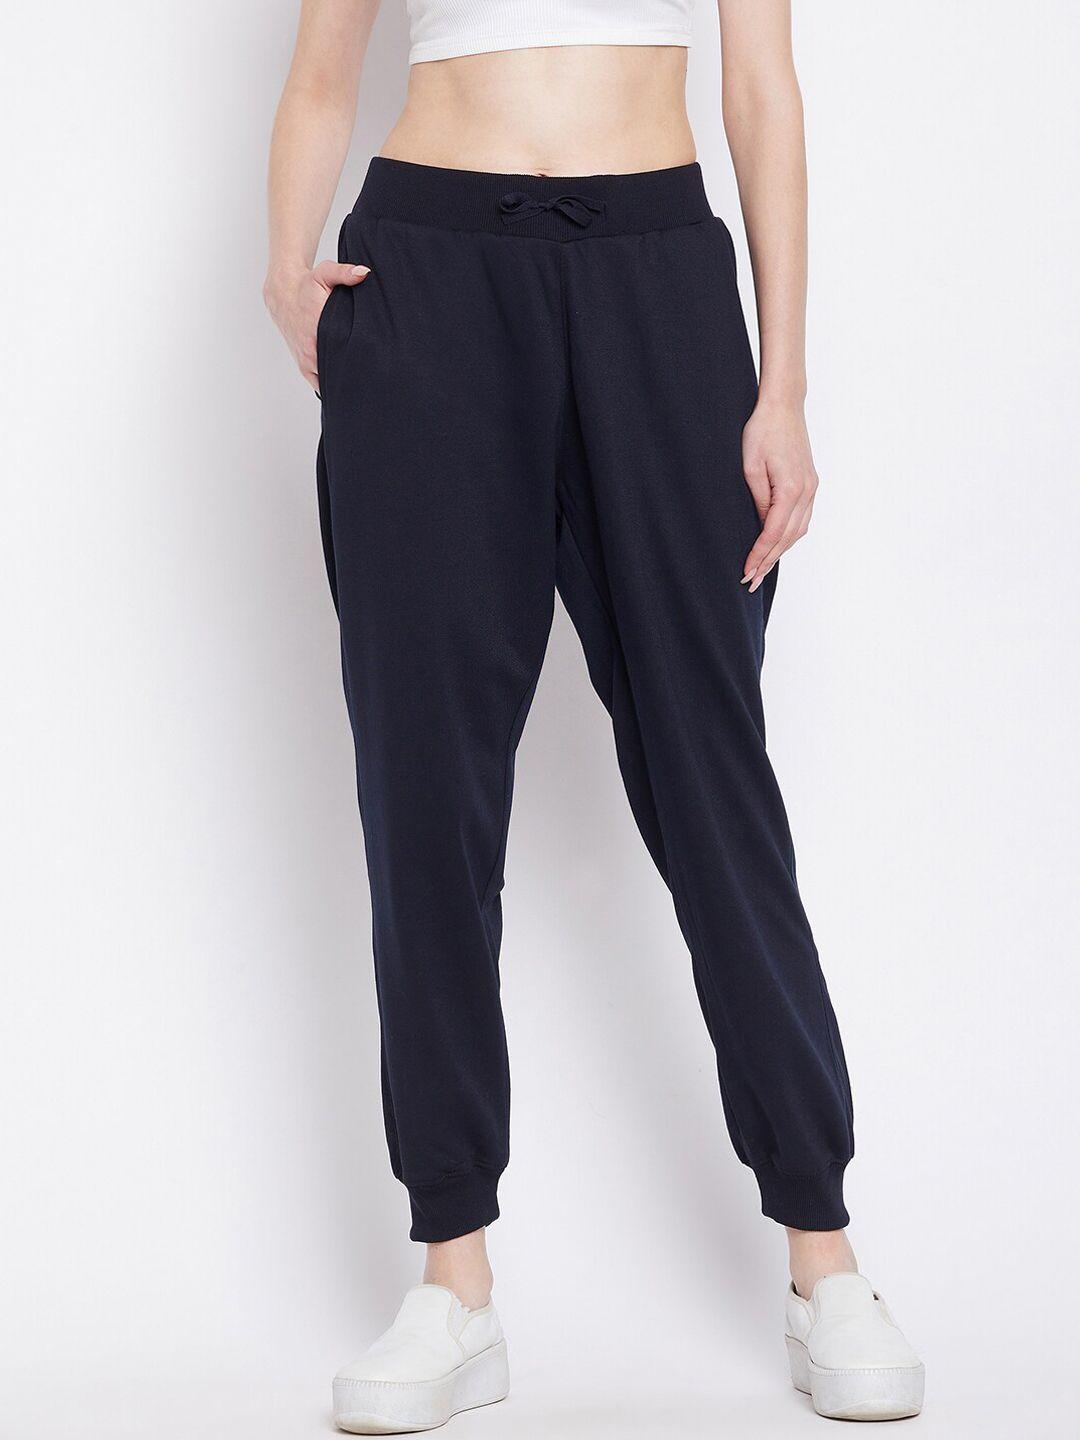 french flexious women relaxed fit cotton joggers